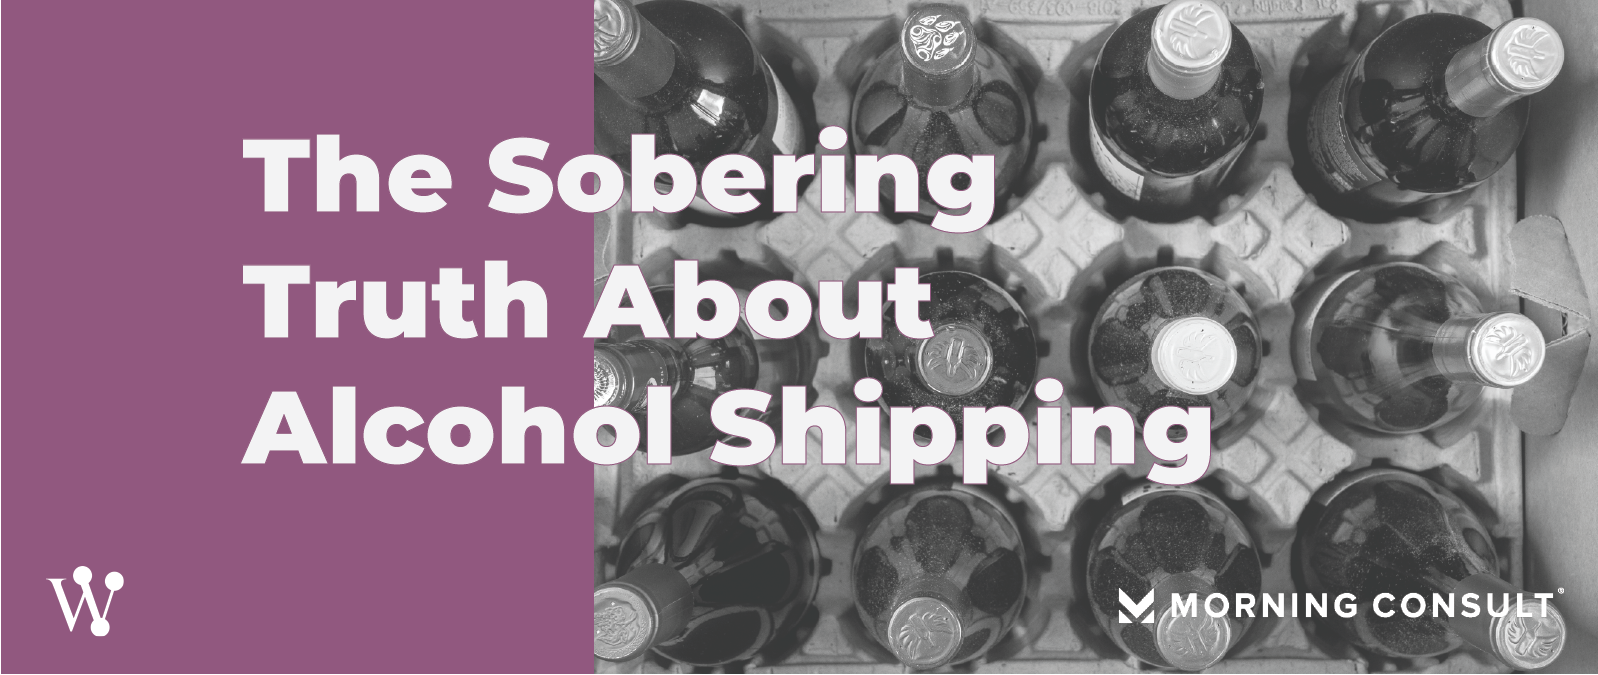 The Sobering Truth About Alcohol Shipping